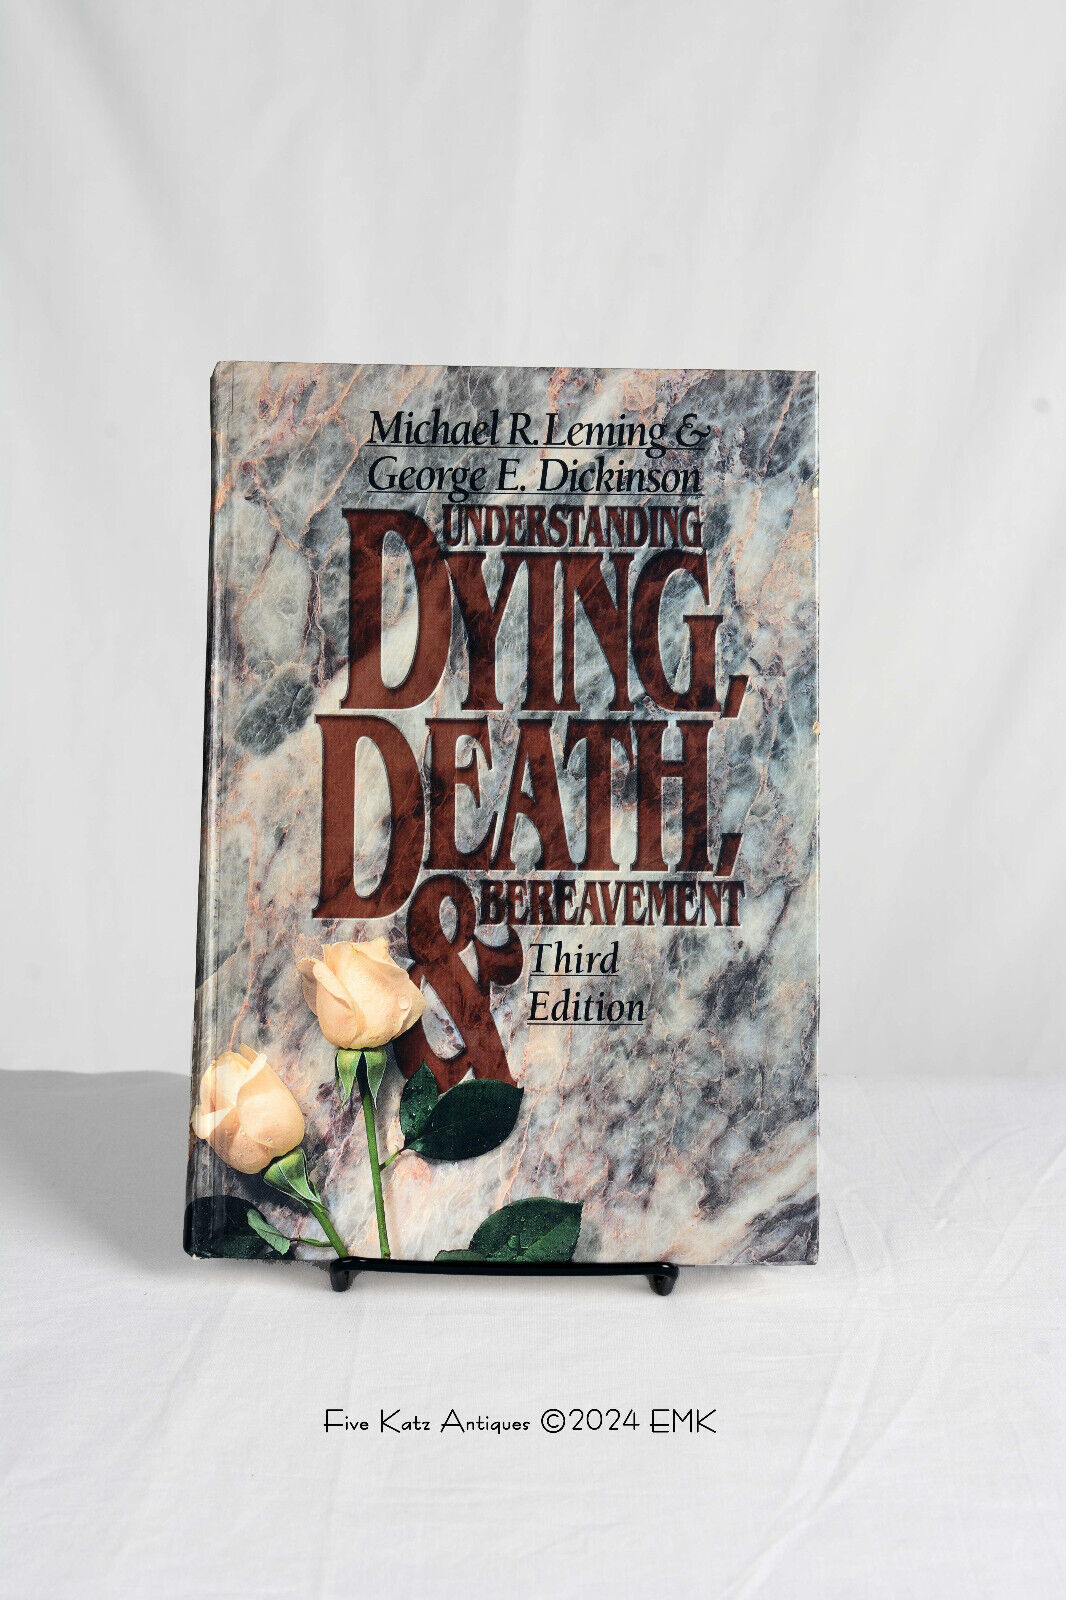 Understanding Dying, Death, and Bereavement - Leming & Dickinson - 3rd Ed.